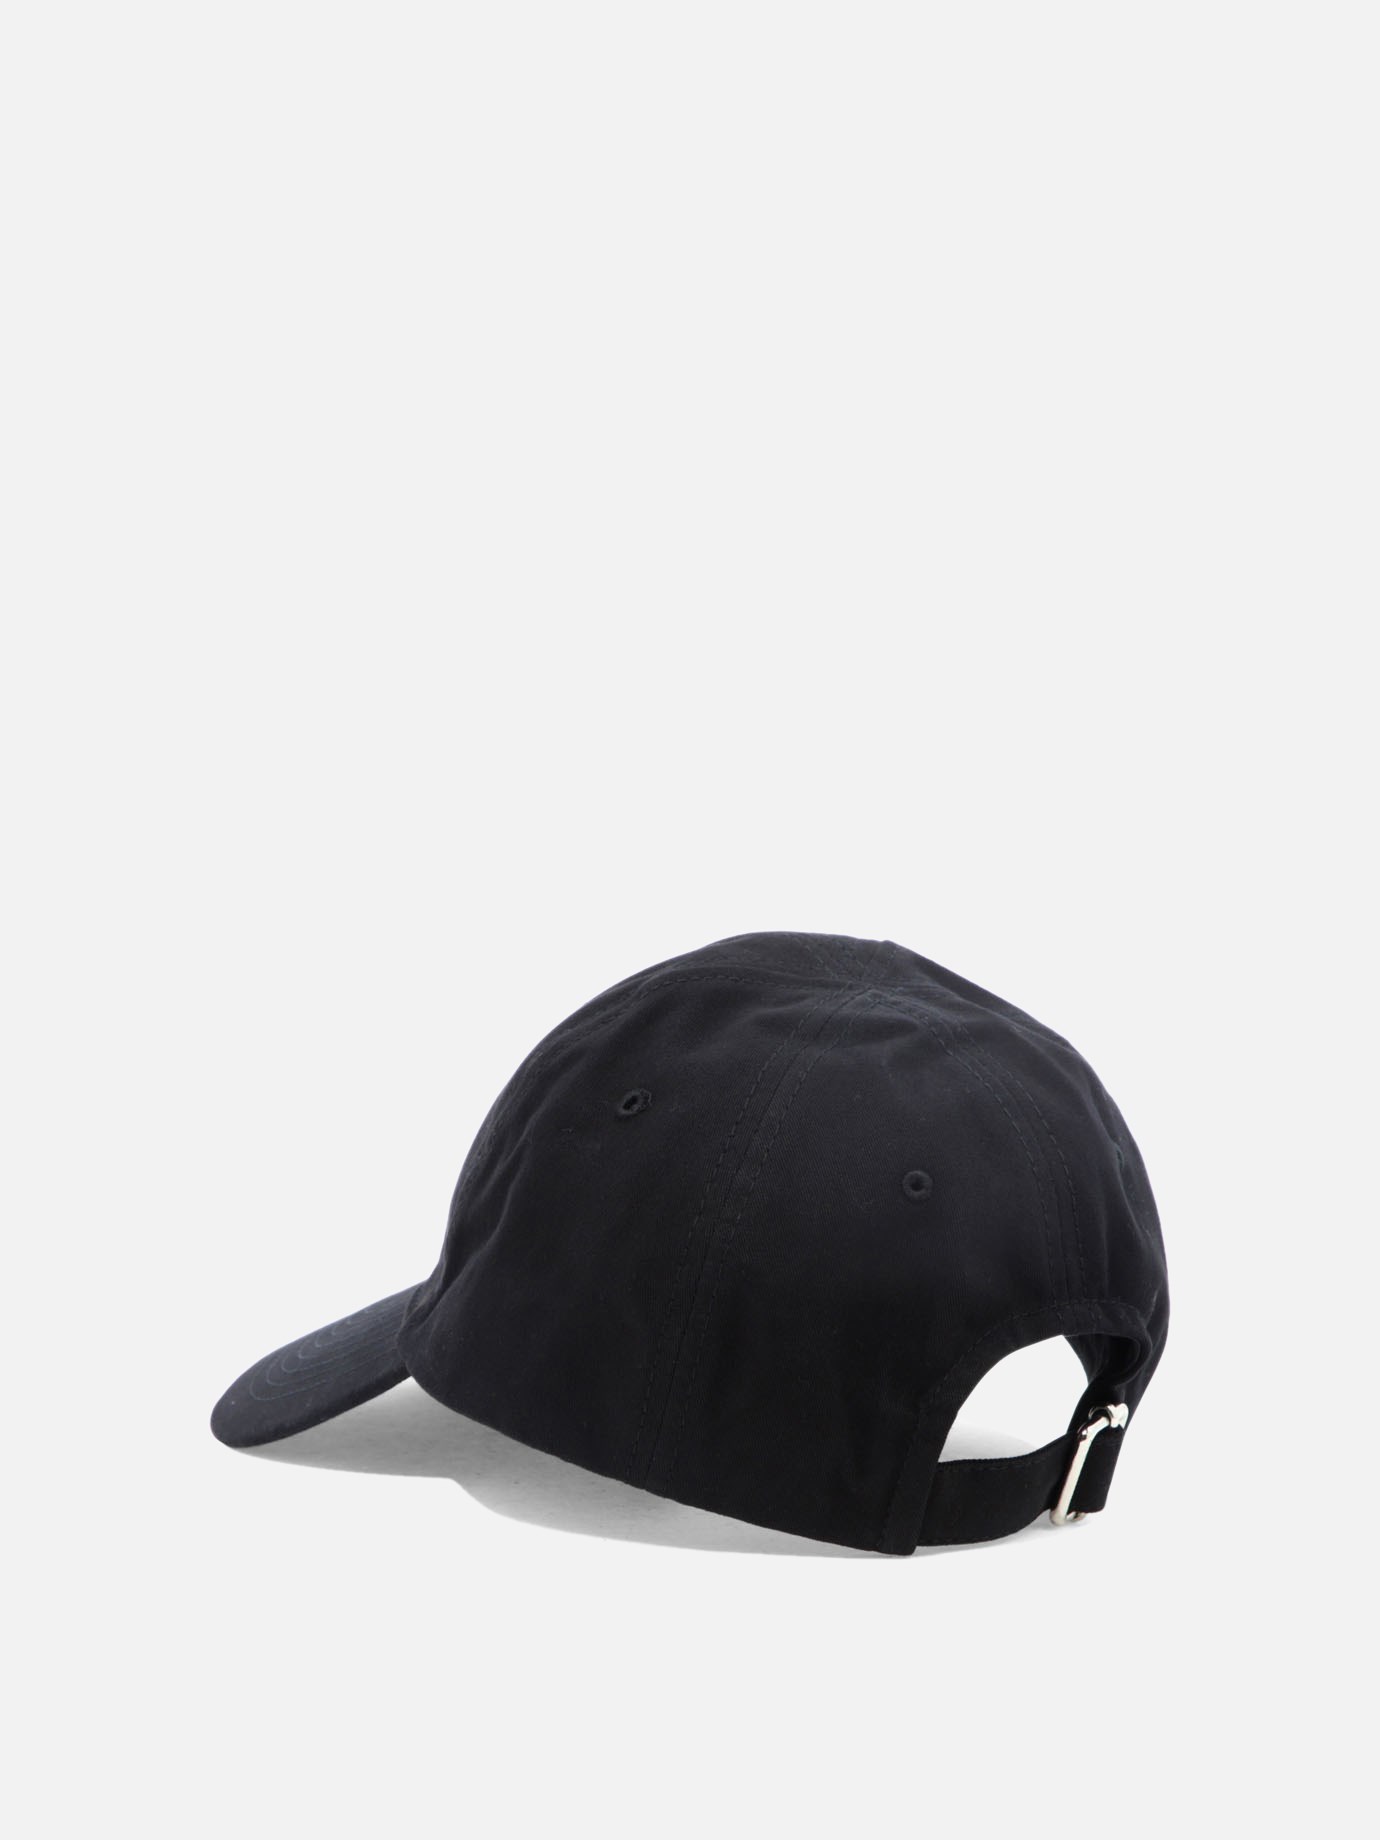 Cappellino  Bookish  by Off-White